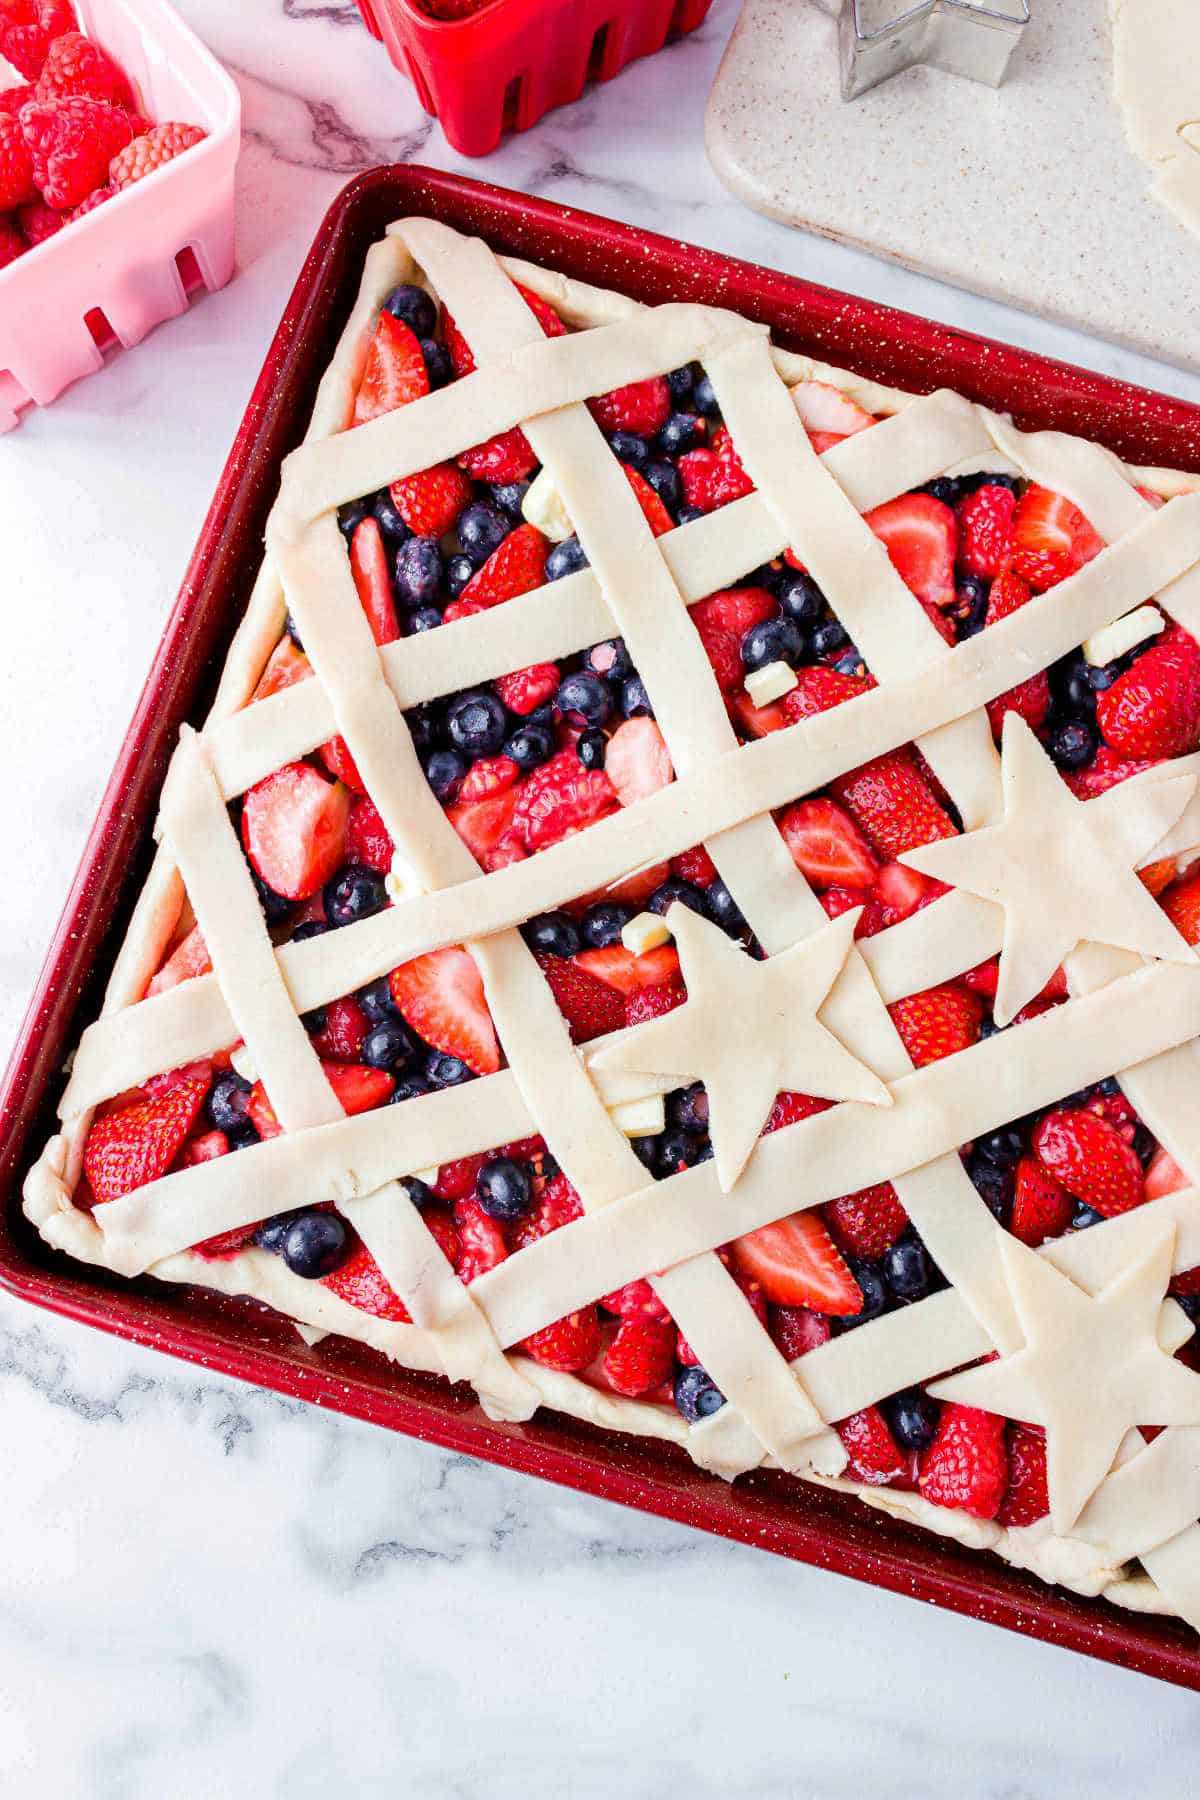 unbaked sheet pan pie with crisscross lattice crust over strawberries, blueberries, and raspberries.